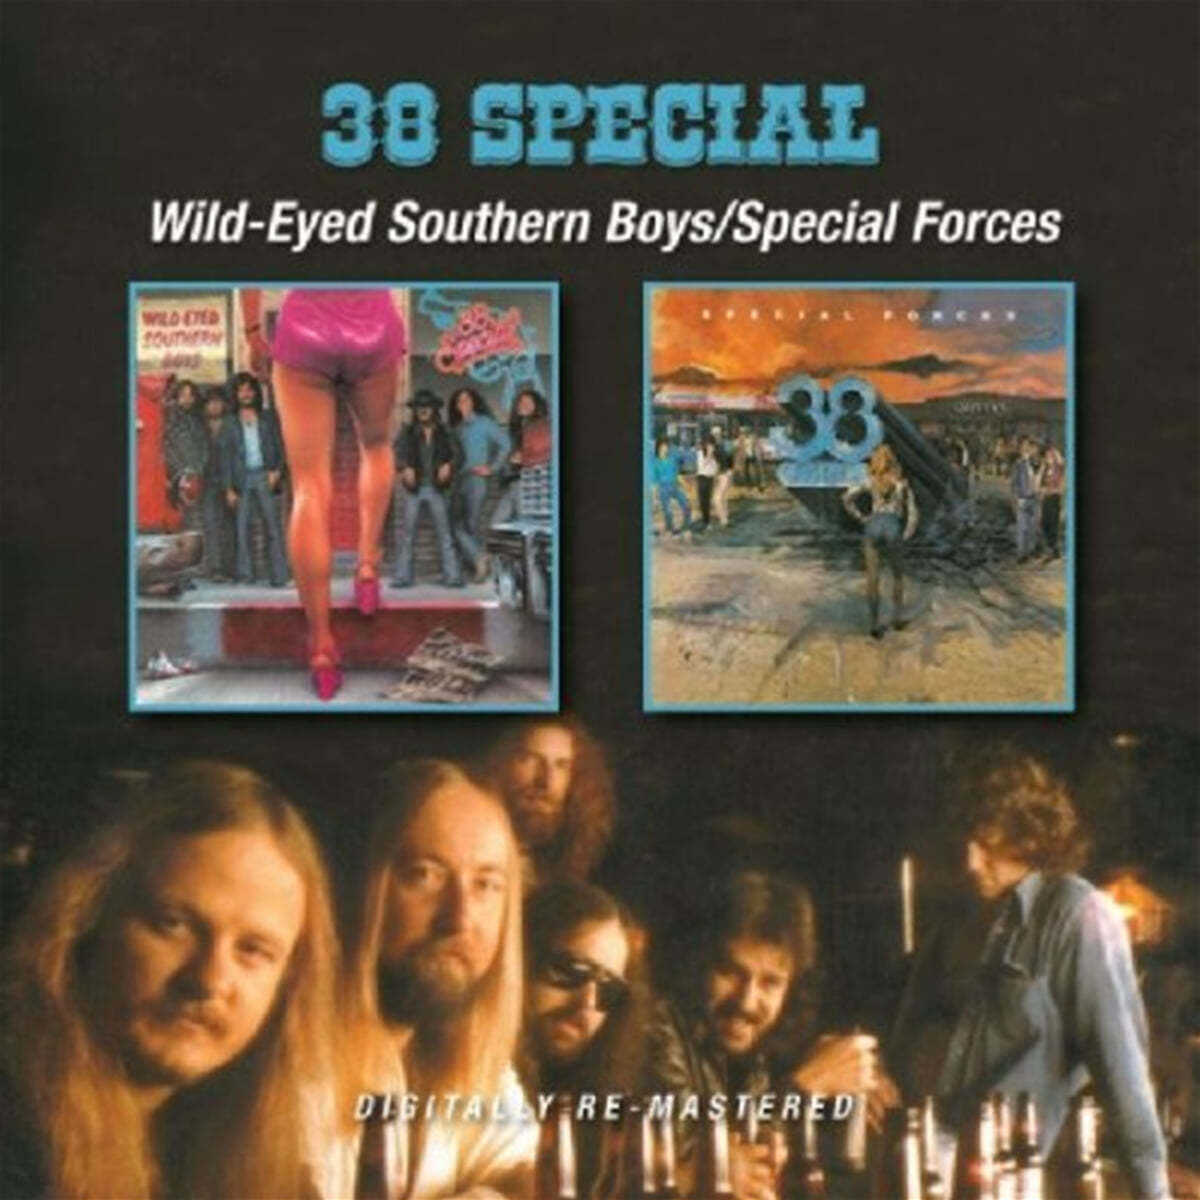 38 Special (38 스페셜) - Wild-Eyed Southern Boys / Special Forces 